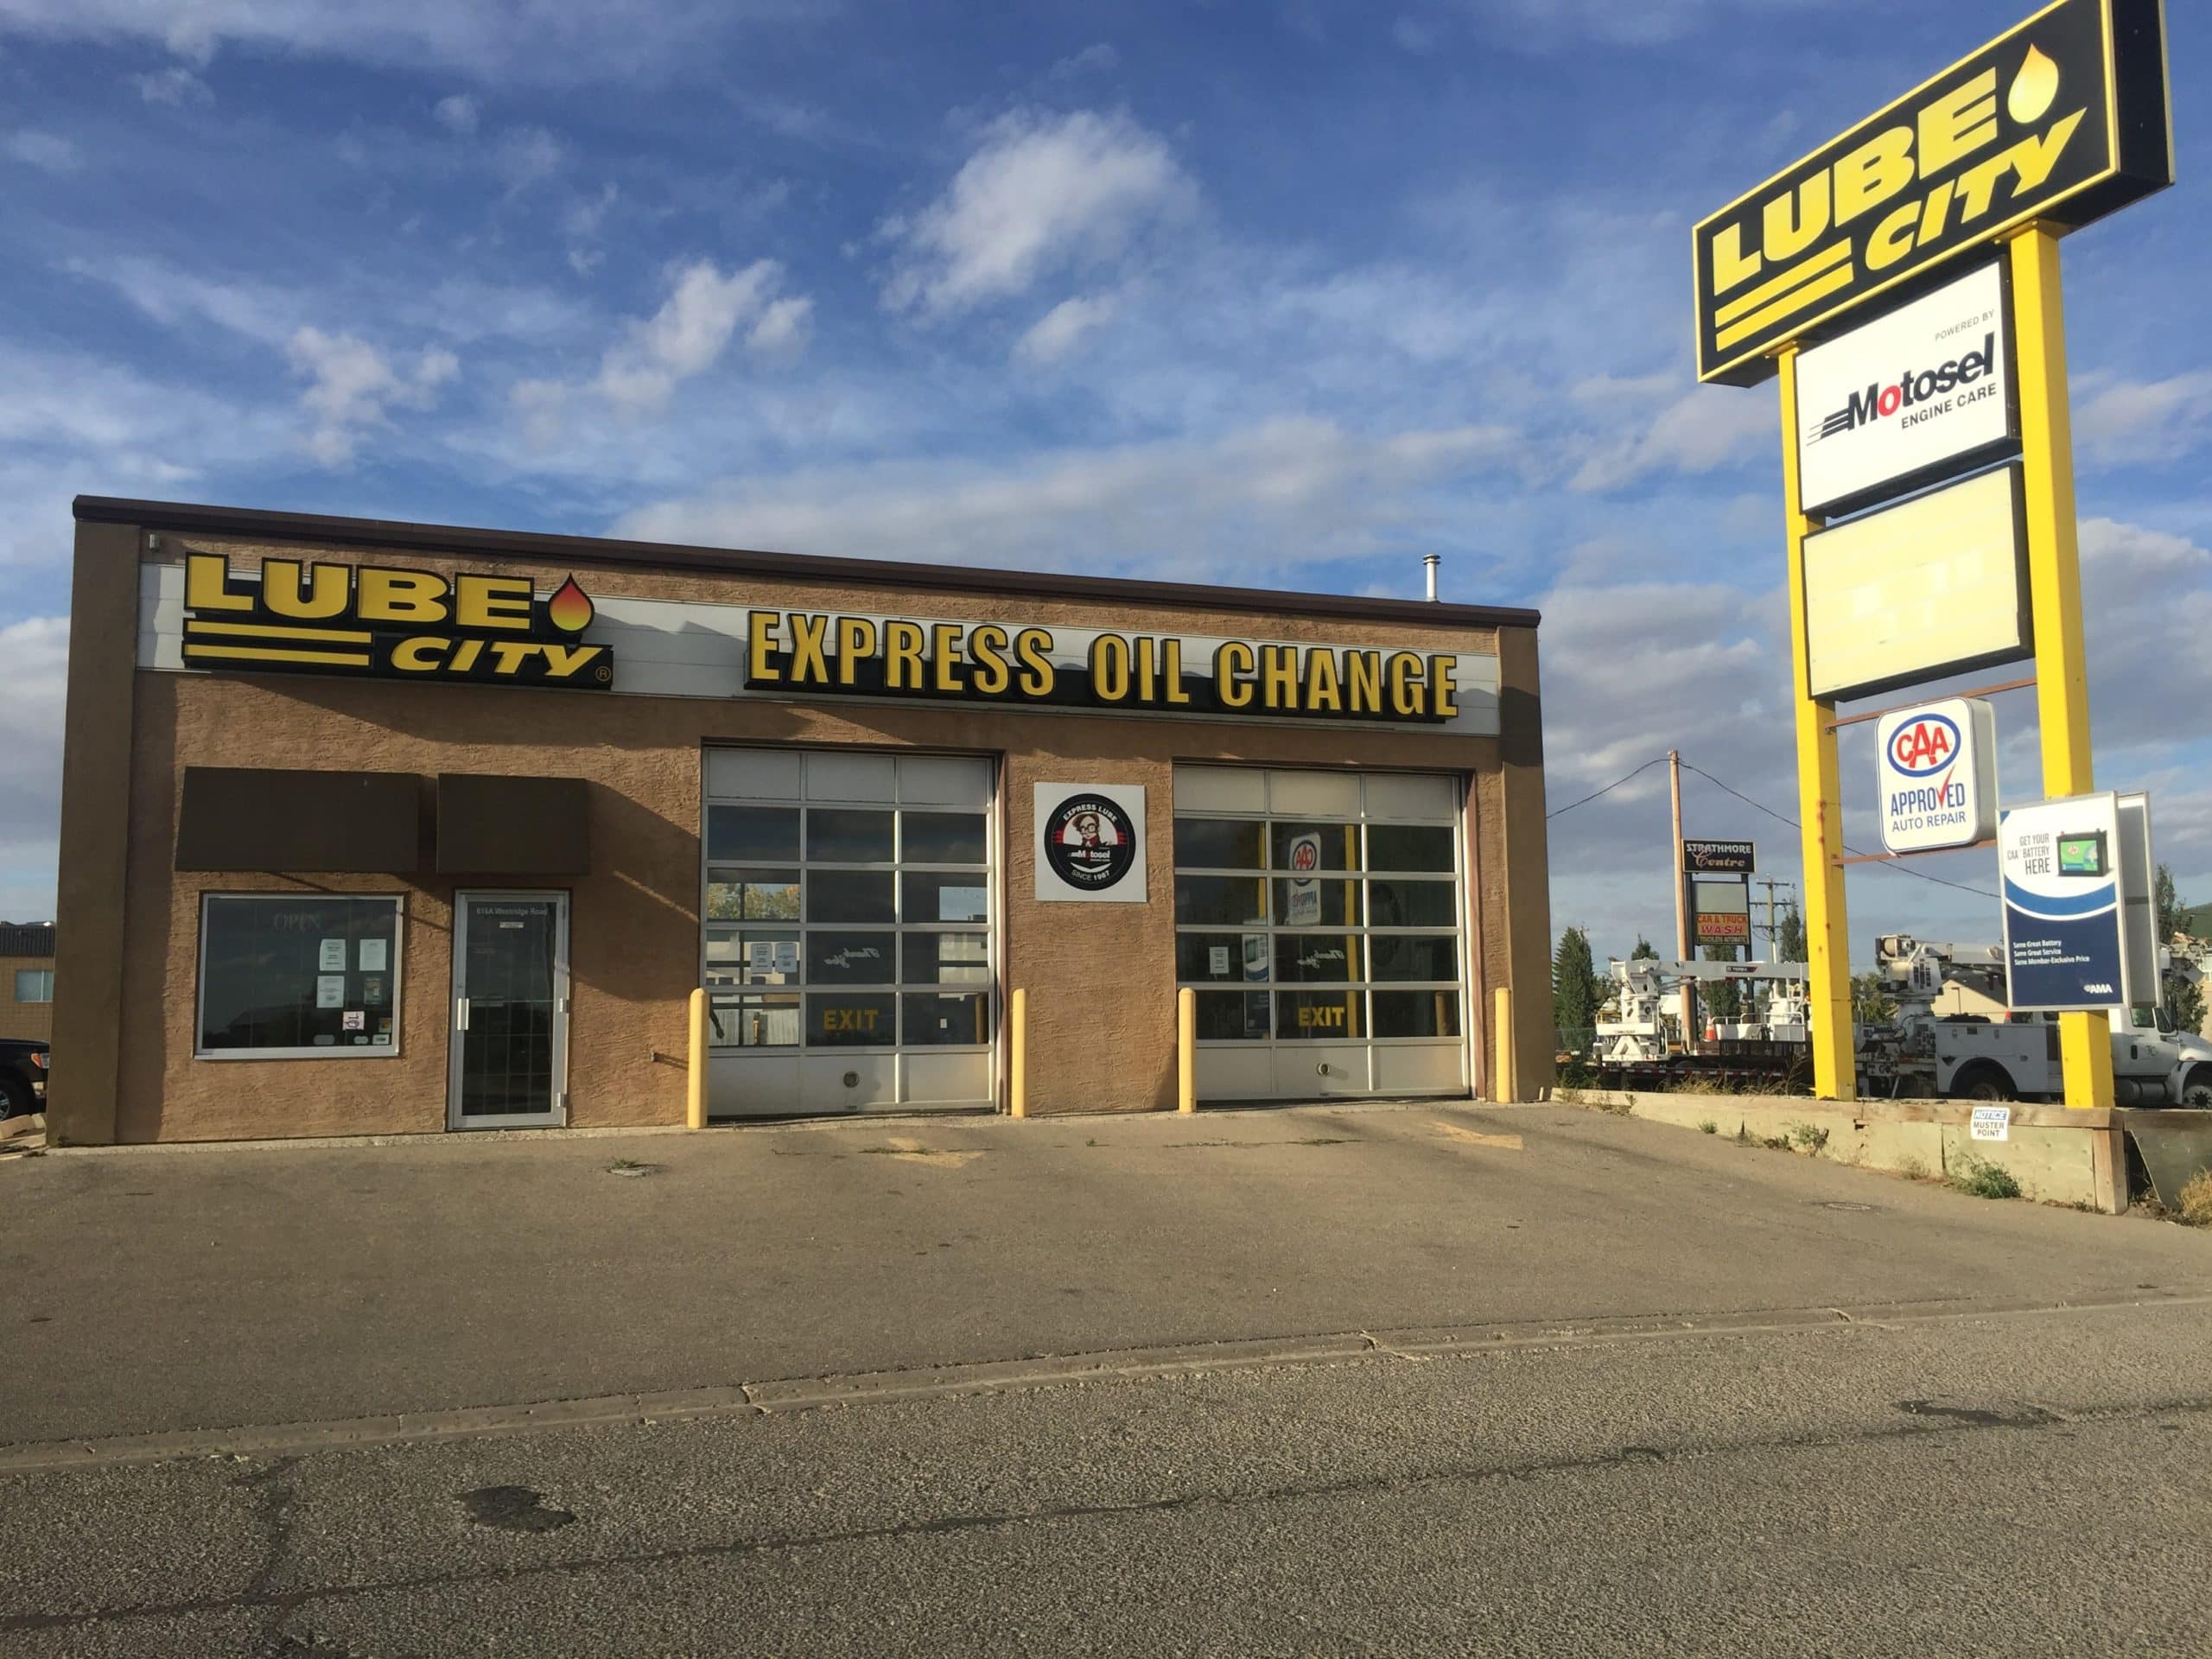 strathmore-oil-change-coupon-saving-deal-lube-city